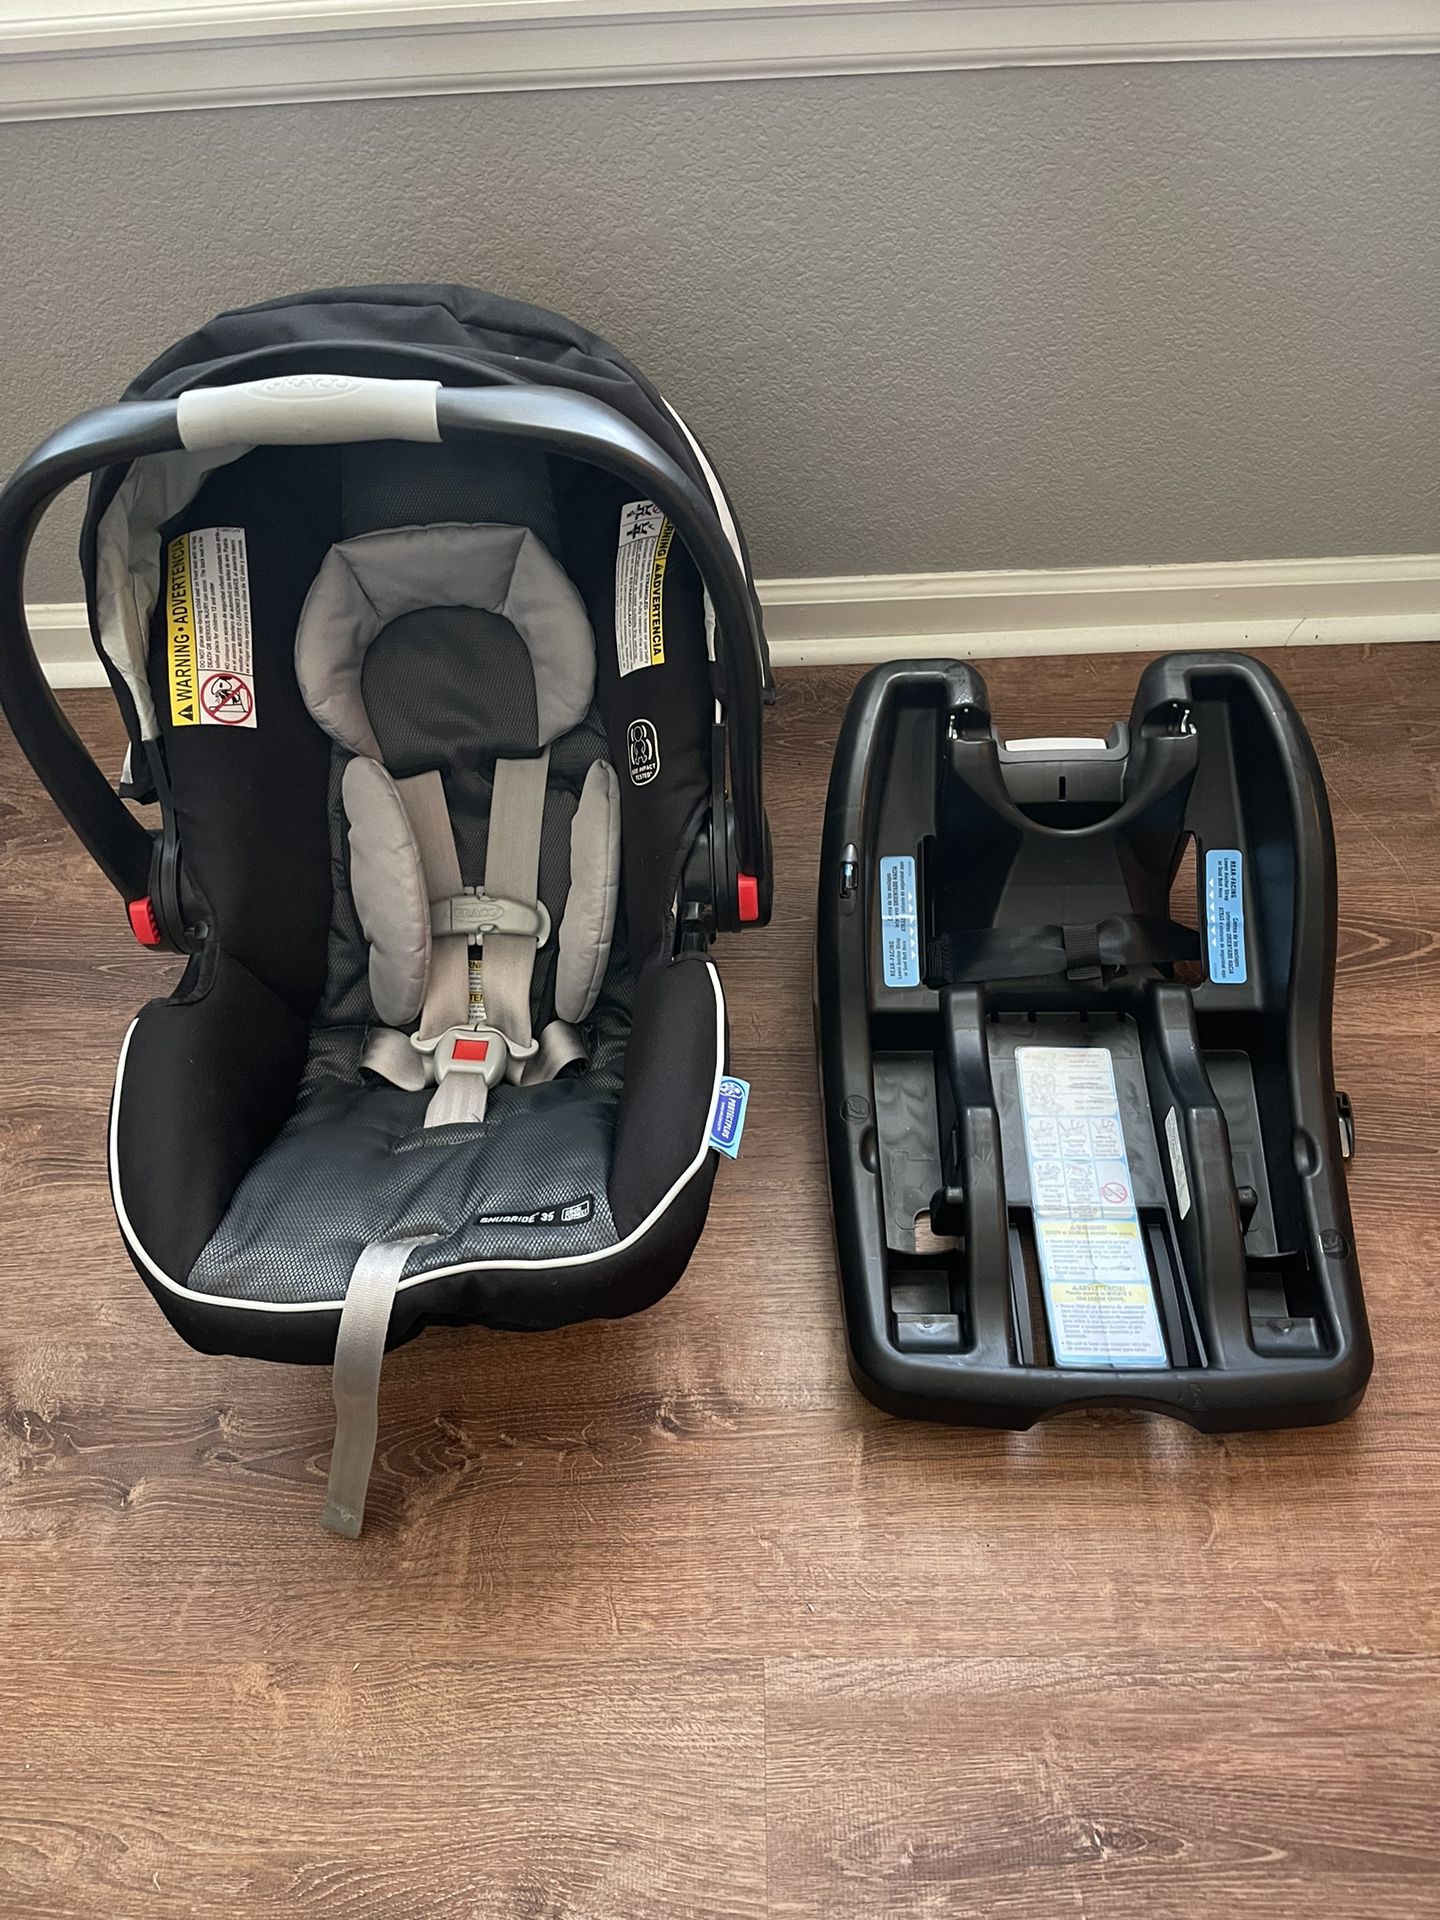 Graco Car Seat and Stroller For Sale!